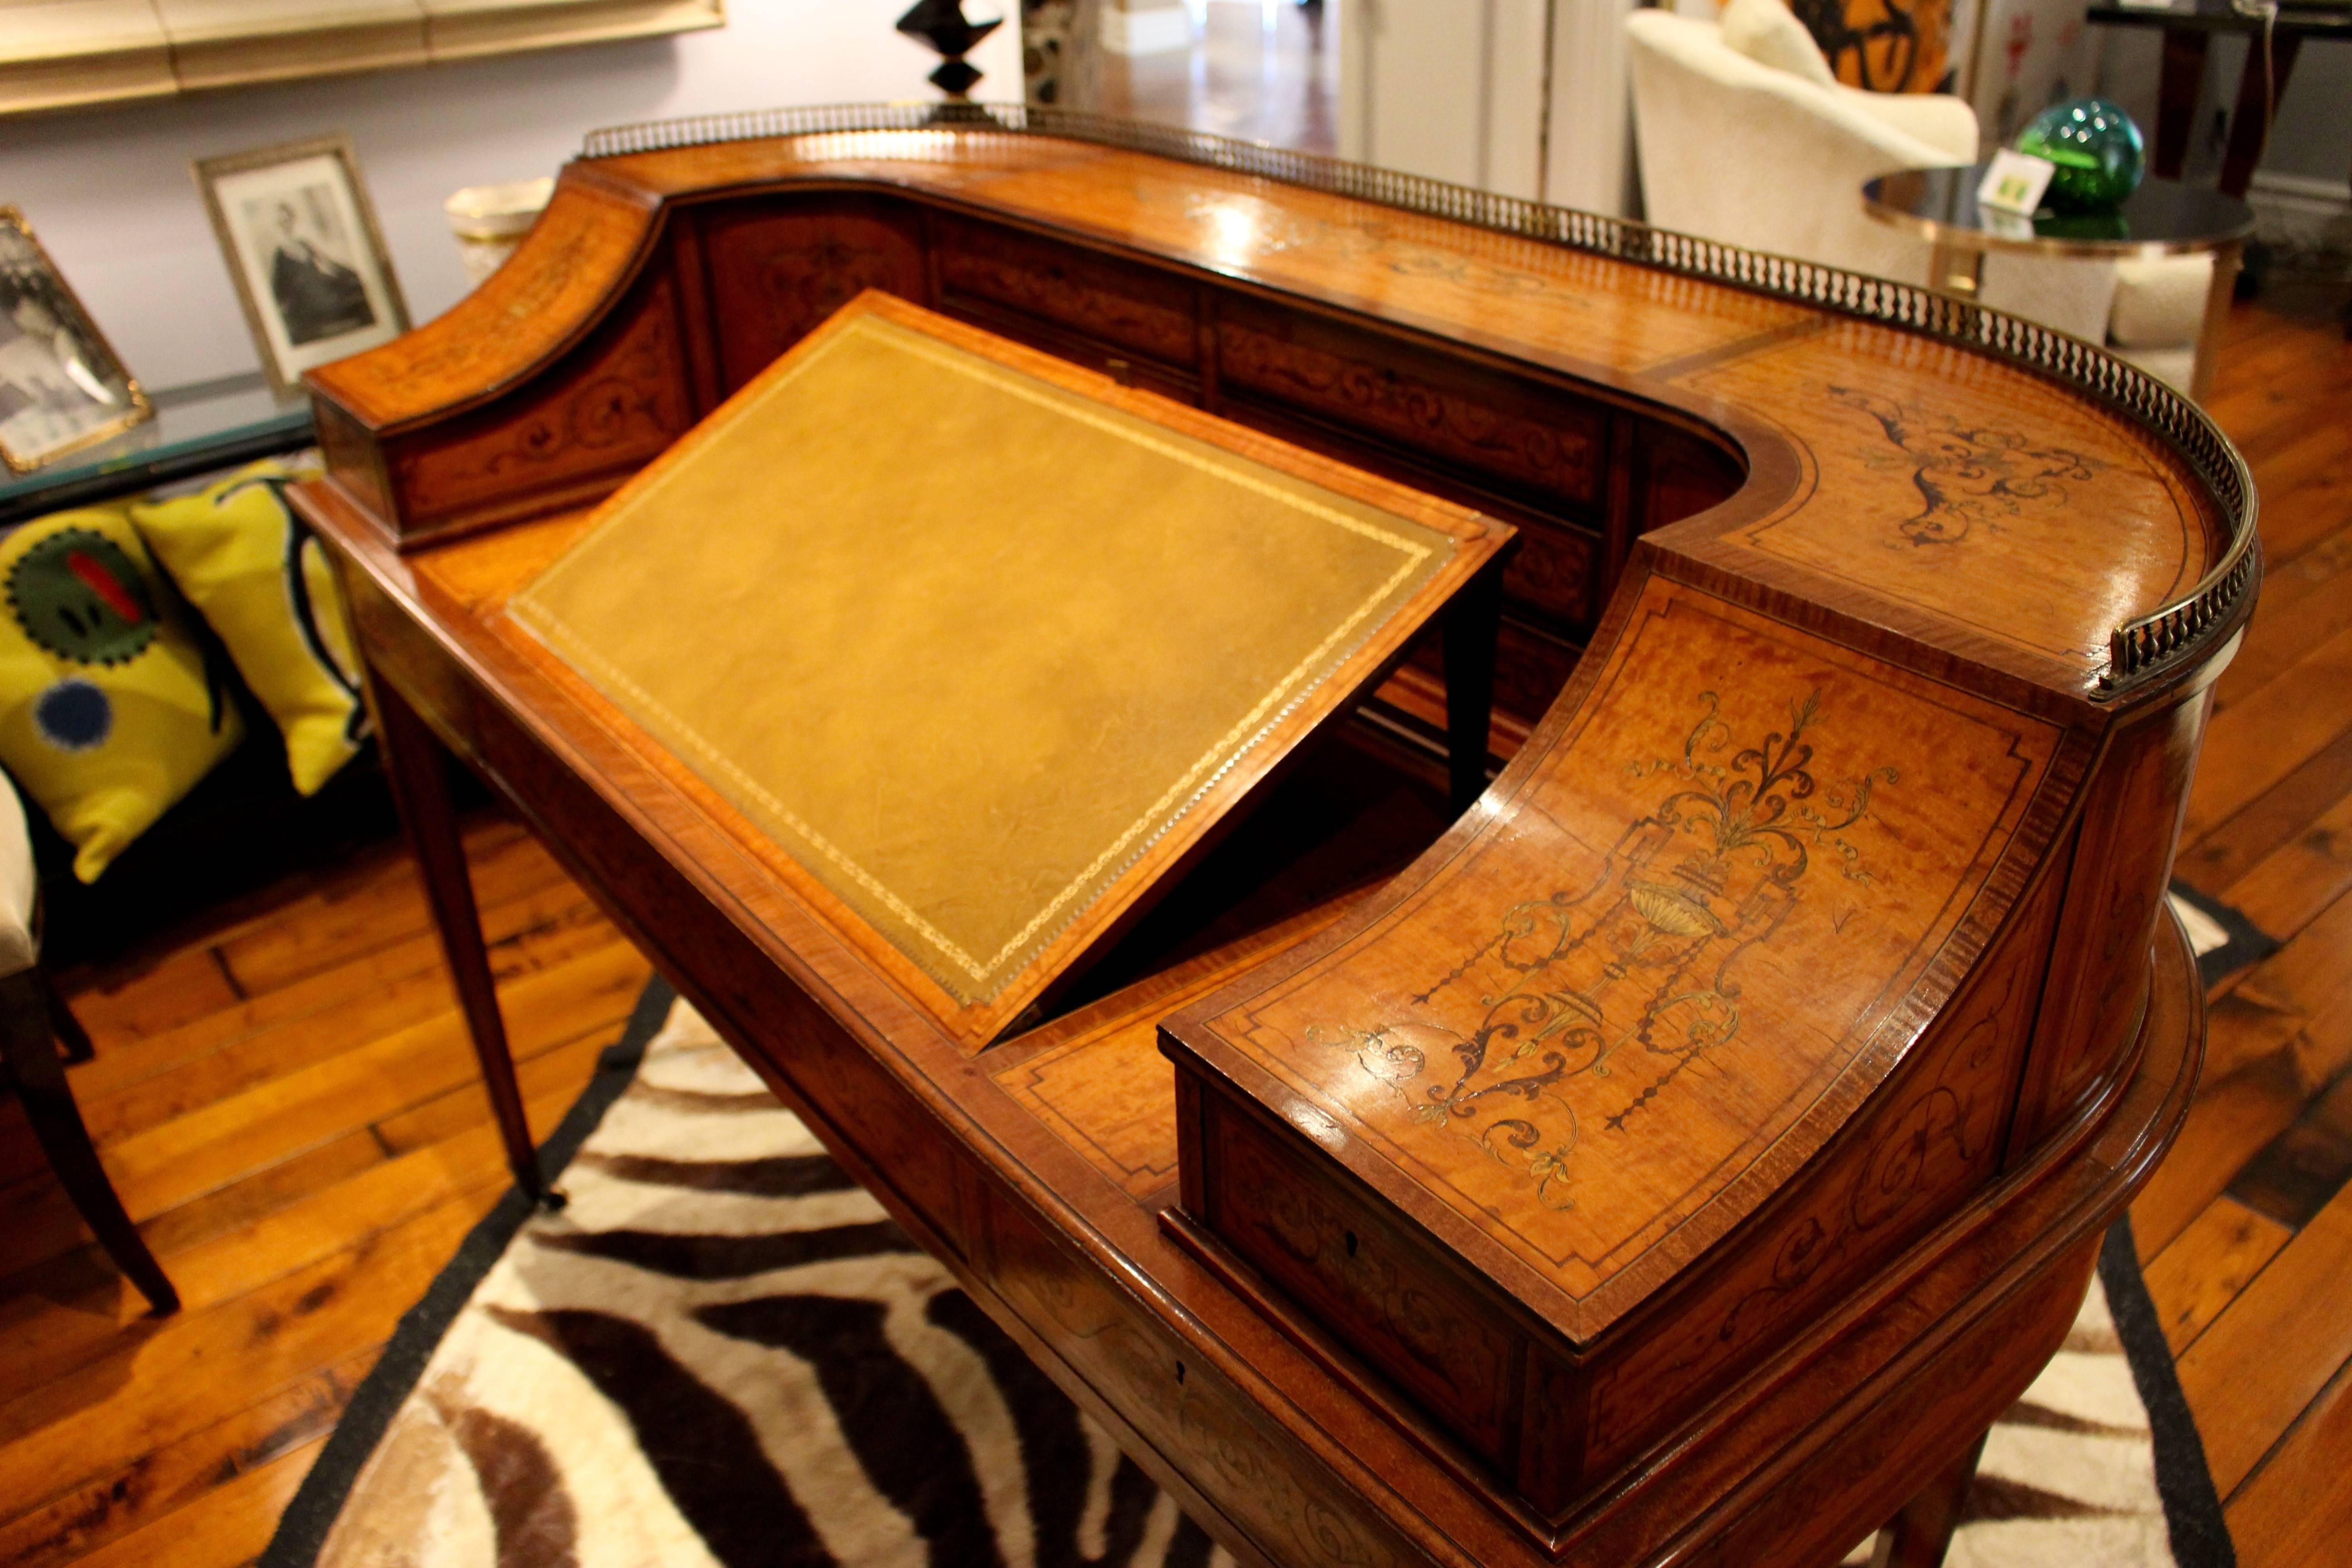  Georgian Adams-Style Carlton House Marquetry Inlaid Desk by Edwards and Roberts In Good Condition For Sale In Palm Desert, CA